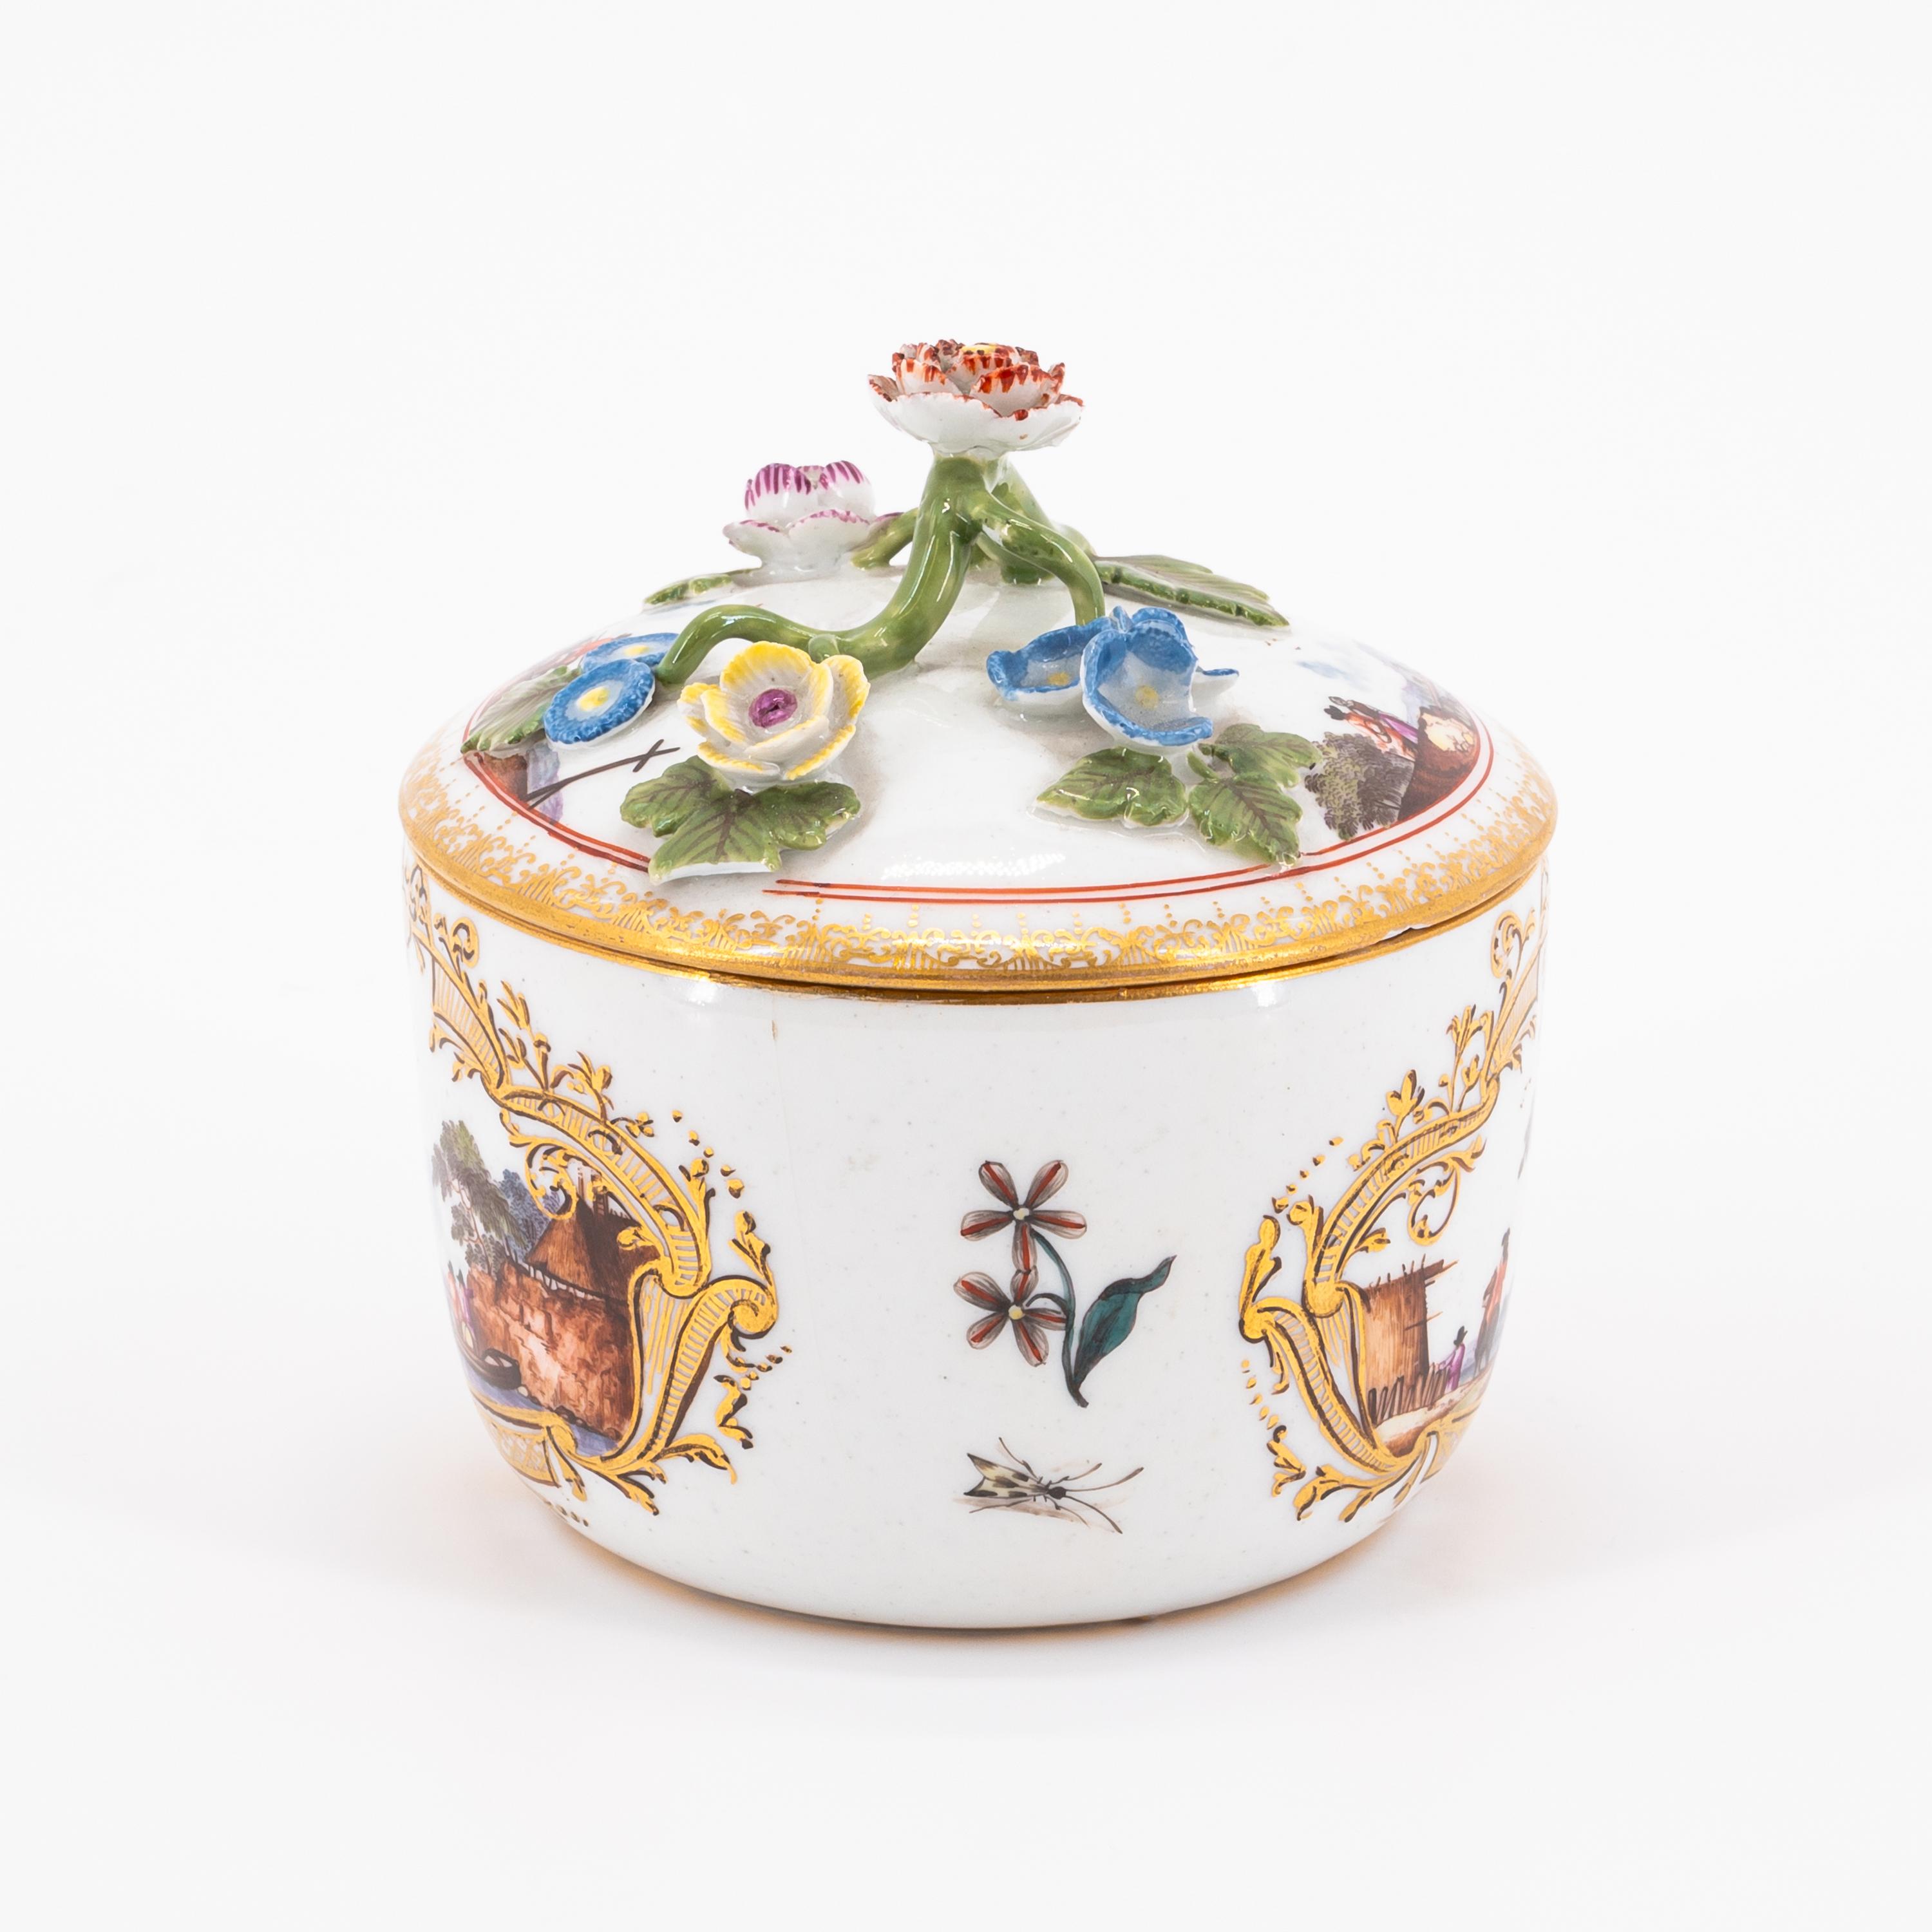 SUGAR BOWL WITH LID WITH LANDSCAPE CARTOUCHES AND APPLIED FLOWERS - Image 4 of 6